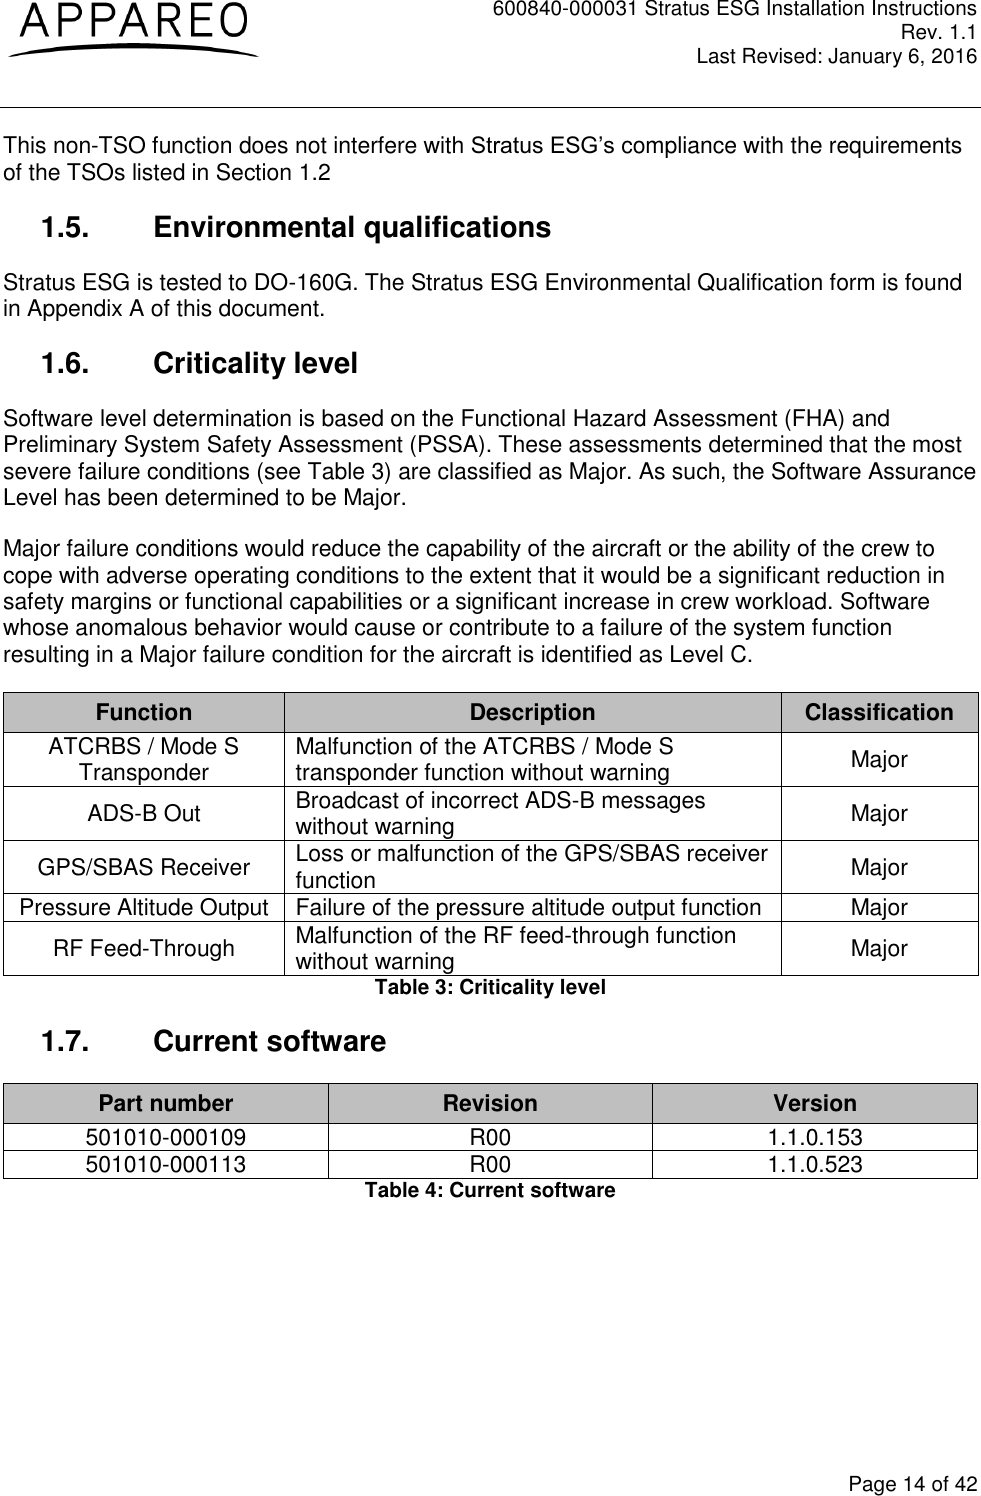 600840-000031 Stratus ESG Installation Instructions Rev. 1.1 Last Revised: January 6, 2016  Page 14 of 42 This non-TSO function does not interfere with Stratus ESG’s compliance with the requirements of the TSOs listed in Section 1.2 1.5.  Environmental qualifications Stratus ESG is tested to DO-160G. The Stratus ESG Environmental Qualification form is found in Appendix A of this document. 1.6.  Criticality level Software level determination is based on the Functional Hazard Assessment (FHA) and Preliminary System Safety Assessment (PSSA). These assessments determined that the most severe failure conditions (see Table 3) are classified as Major. As such, the Software Assurance Level has been determined to be Major. Major failure conditions would reduce the capability of the aircraft or the ability of the crew to cope with adverse operating conditions to the extent that it would be a significant reduction in safety margins or functional capabilities or a significant increase in crew workload. Software whose anomalous behavior would cause or contribute to a failure of the system function resulting in a Major failure condition for the aircraft is identified as Level C. Function Description Classification ATCRBS / Mode S Transponder Malfunction of the ATCRBS / Mode S transponder function without warning Major ADS-B Out Broadcast of incorrect ADS-B messages without warning Major GPS/SBAS Receiver Loss or malfunction of the GPS/SBAS receiver function Major Pressure Altitude Output Failure of the pressure altitude output function Major RF Feed-Through Malfunction of the RF feed-through function without warning Major Table 3: Criticality level 1.7.  Current software Part number Revision Version 501010-000109 R00 1.1.0.153 501010-000113 R00 1.1.0.523 Table 4: Current software 